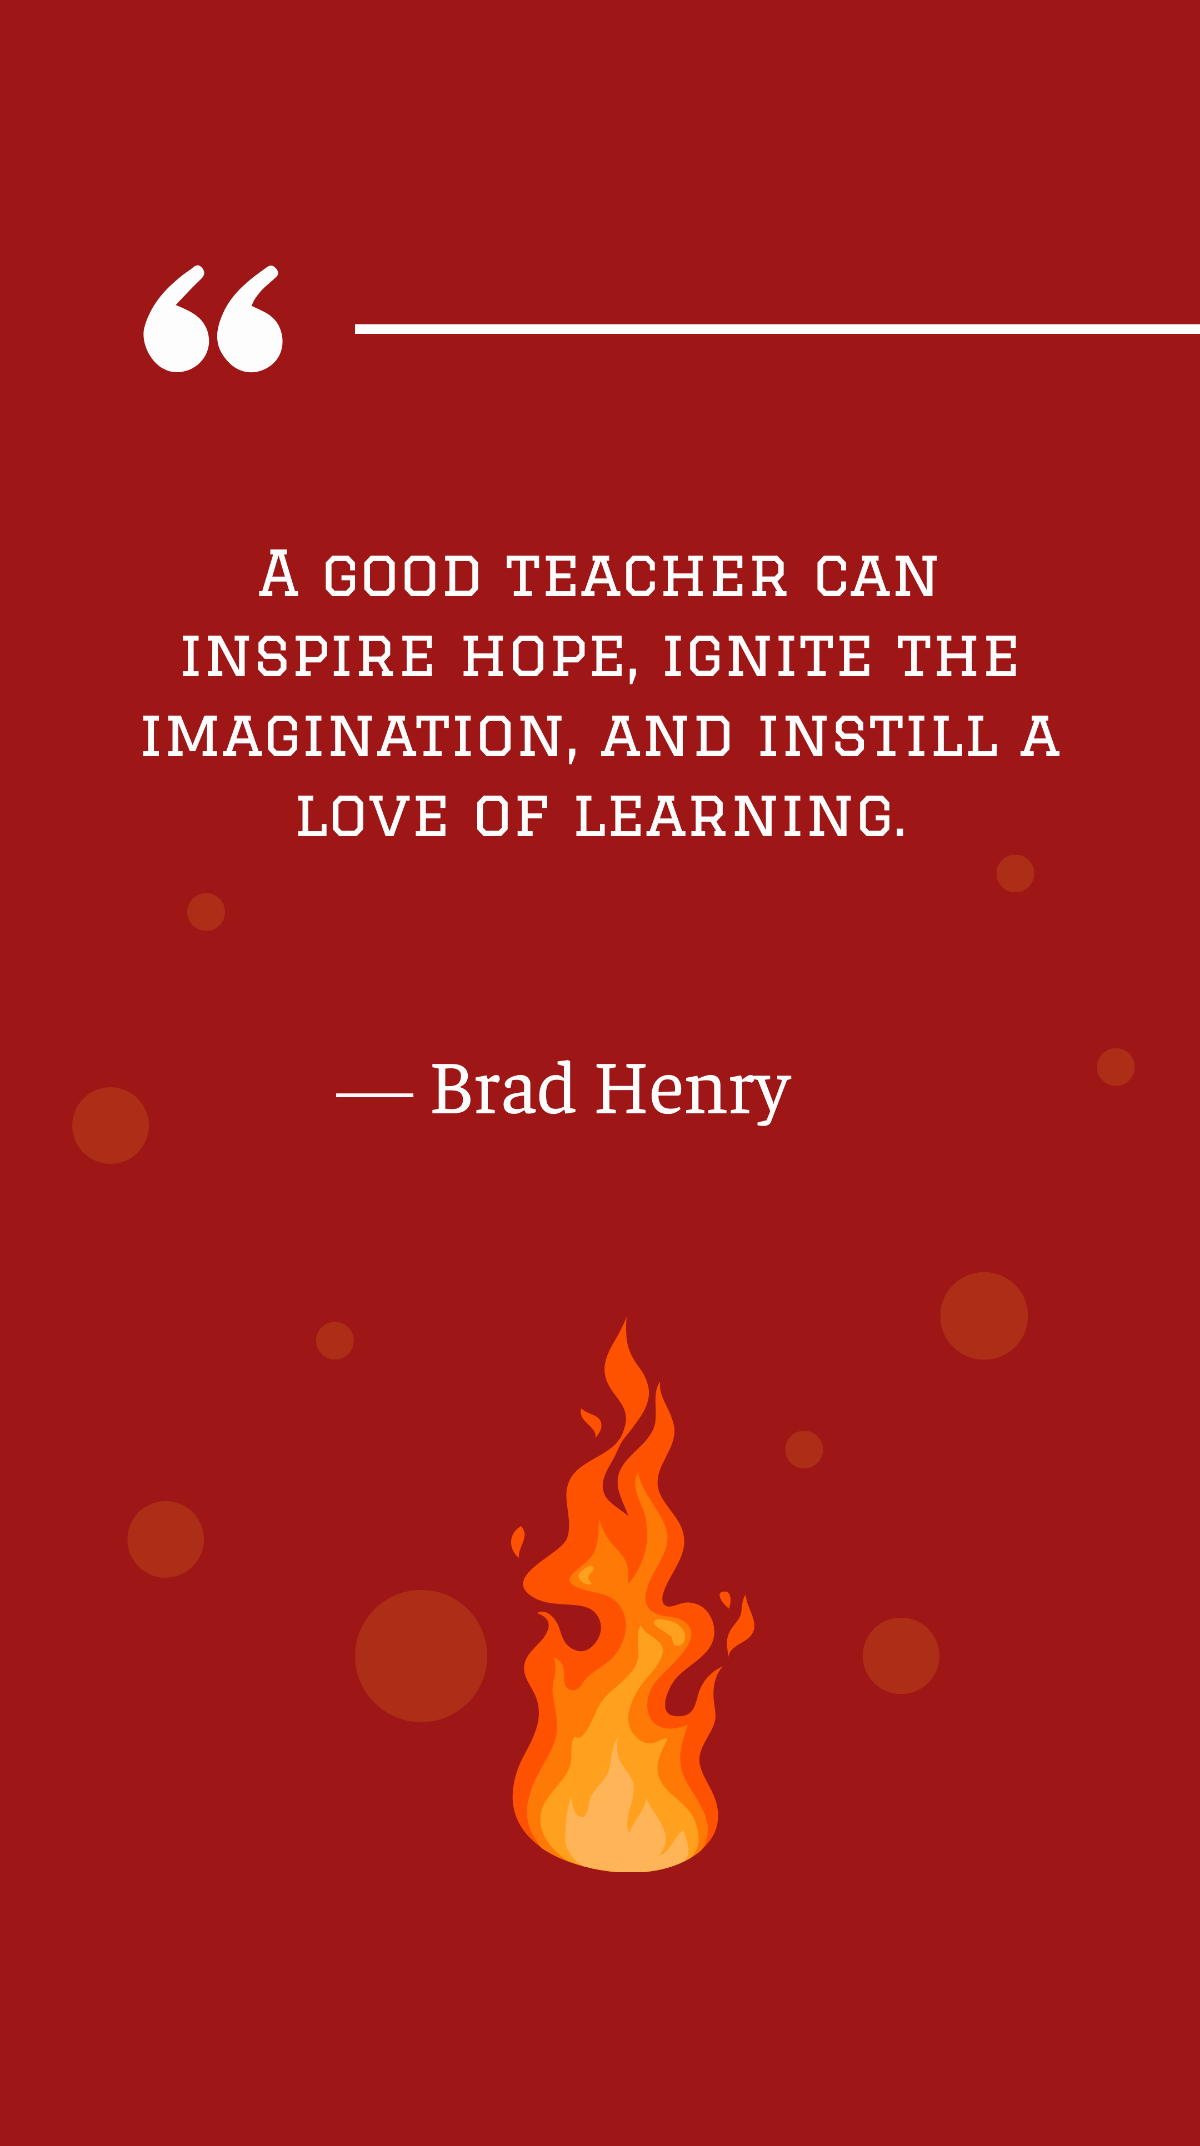 Brad Henry - A good teacher can inspire hope, ignite the imagination, and instill a love of learning.